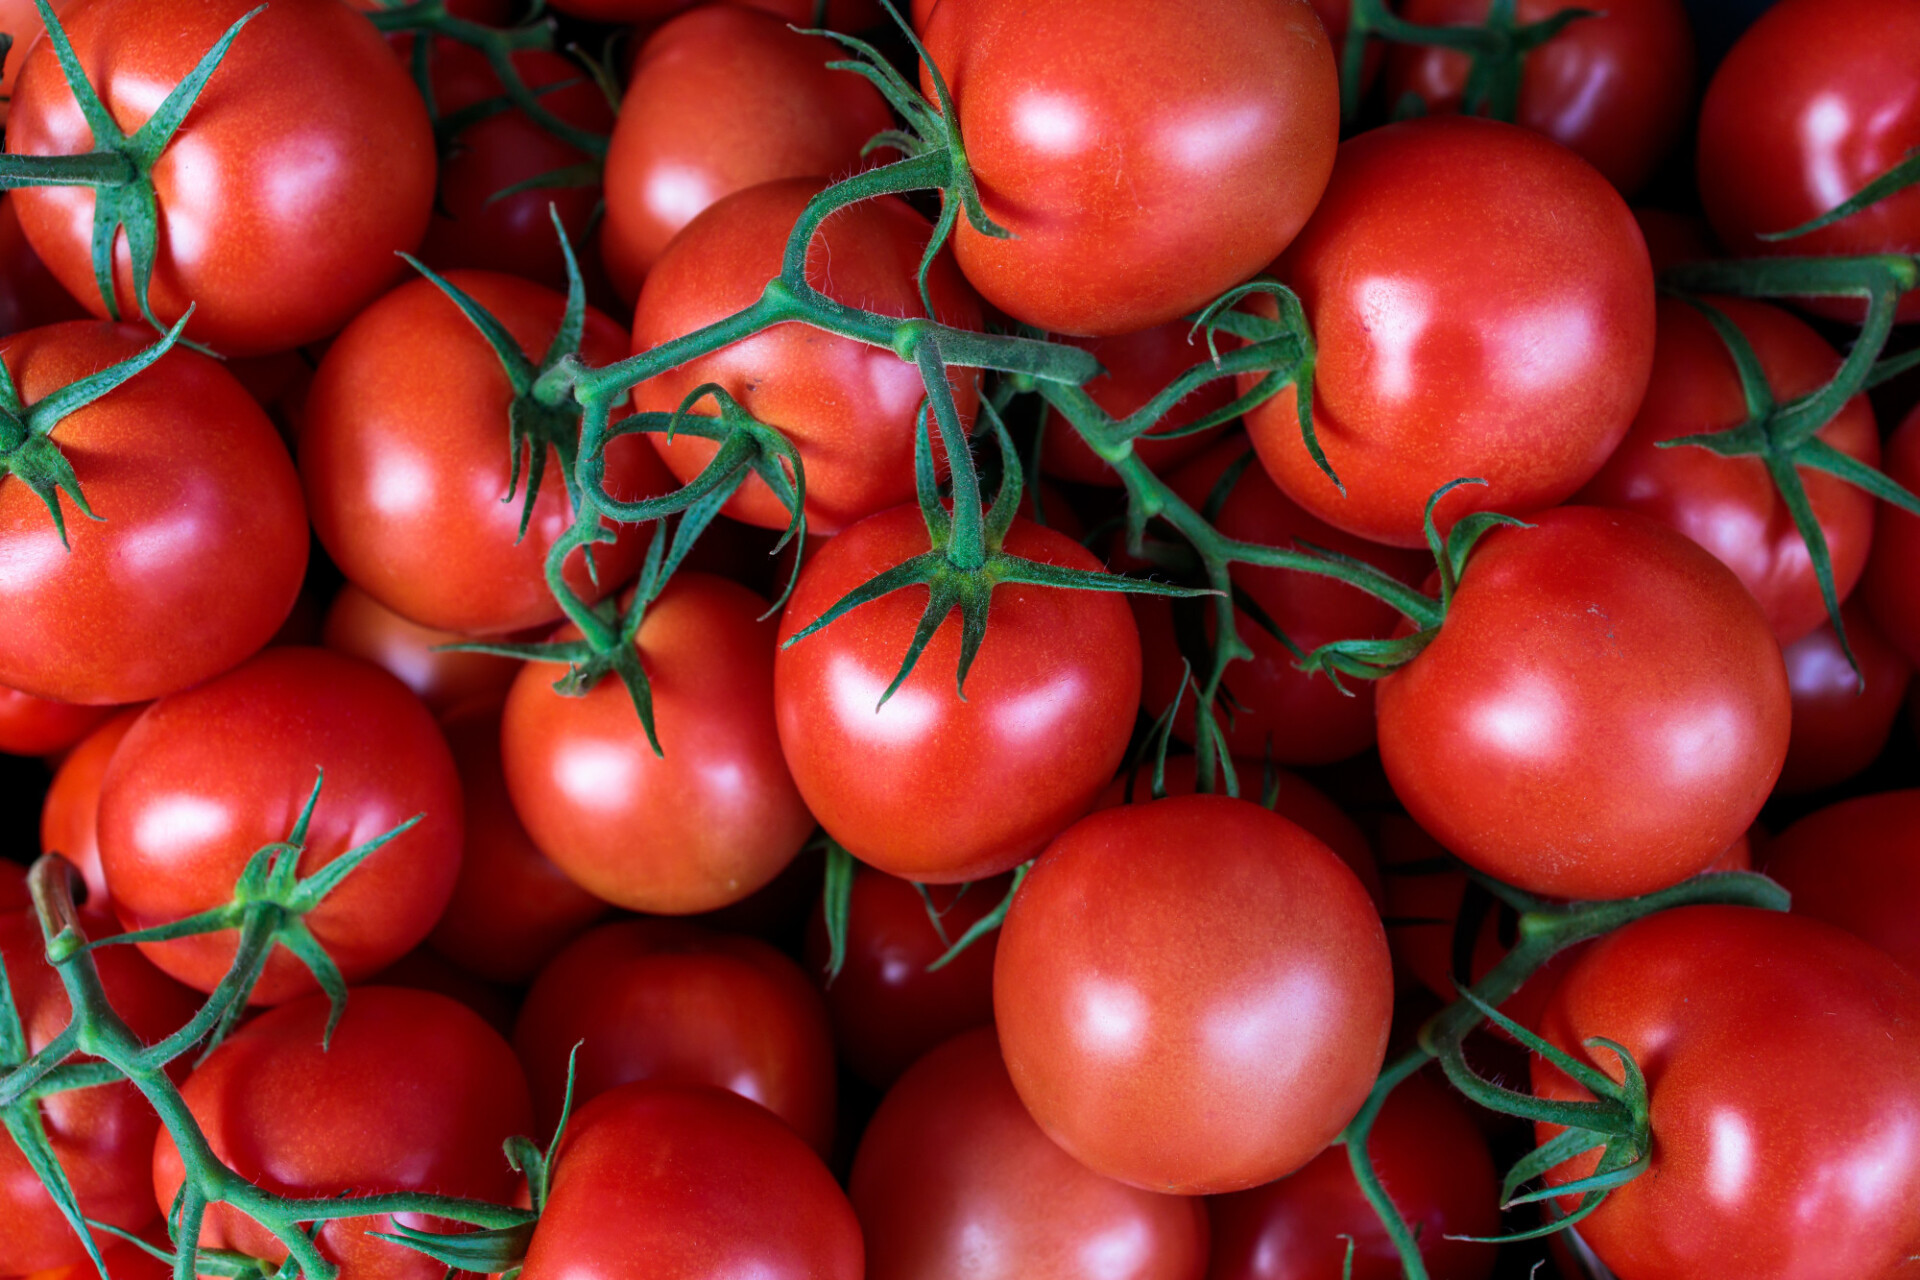 Tomatoes background